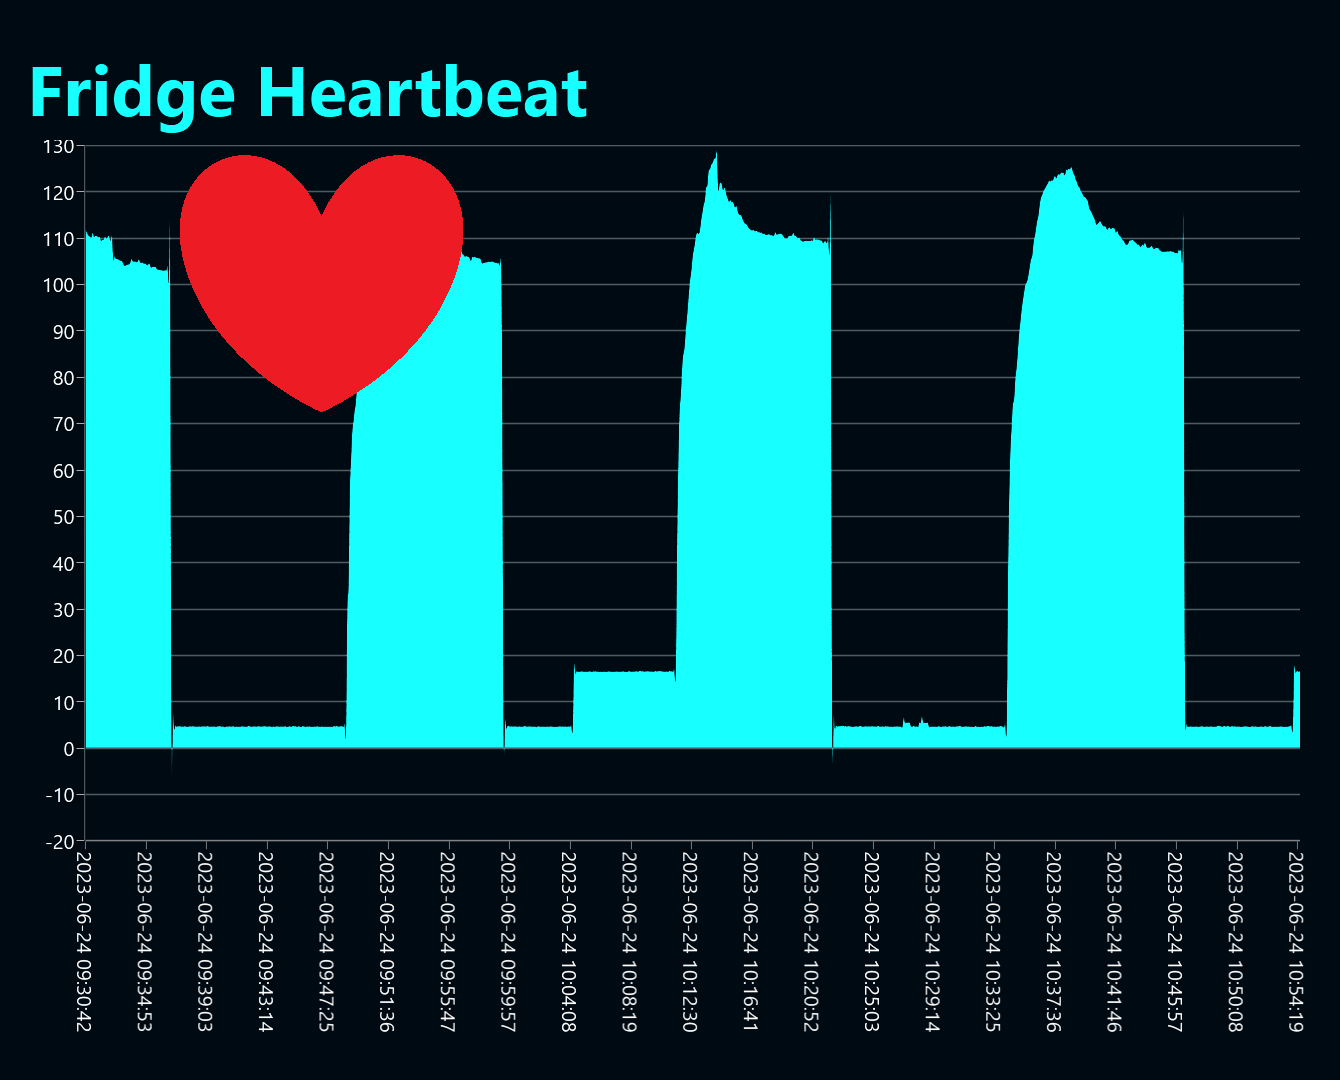 How to measure the heartbeat of a fridge - Best practice for handling continuous sensor data